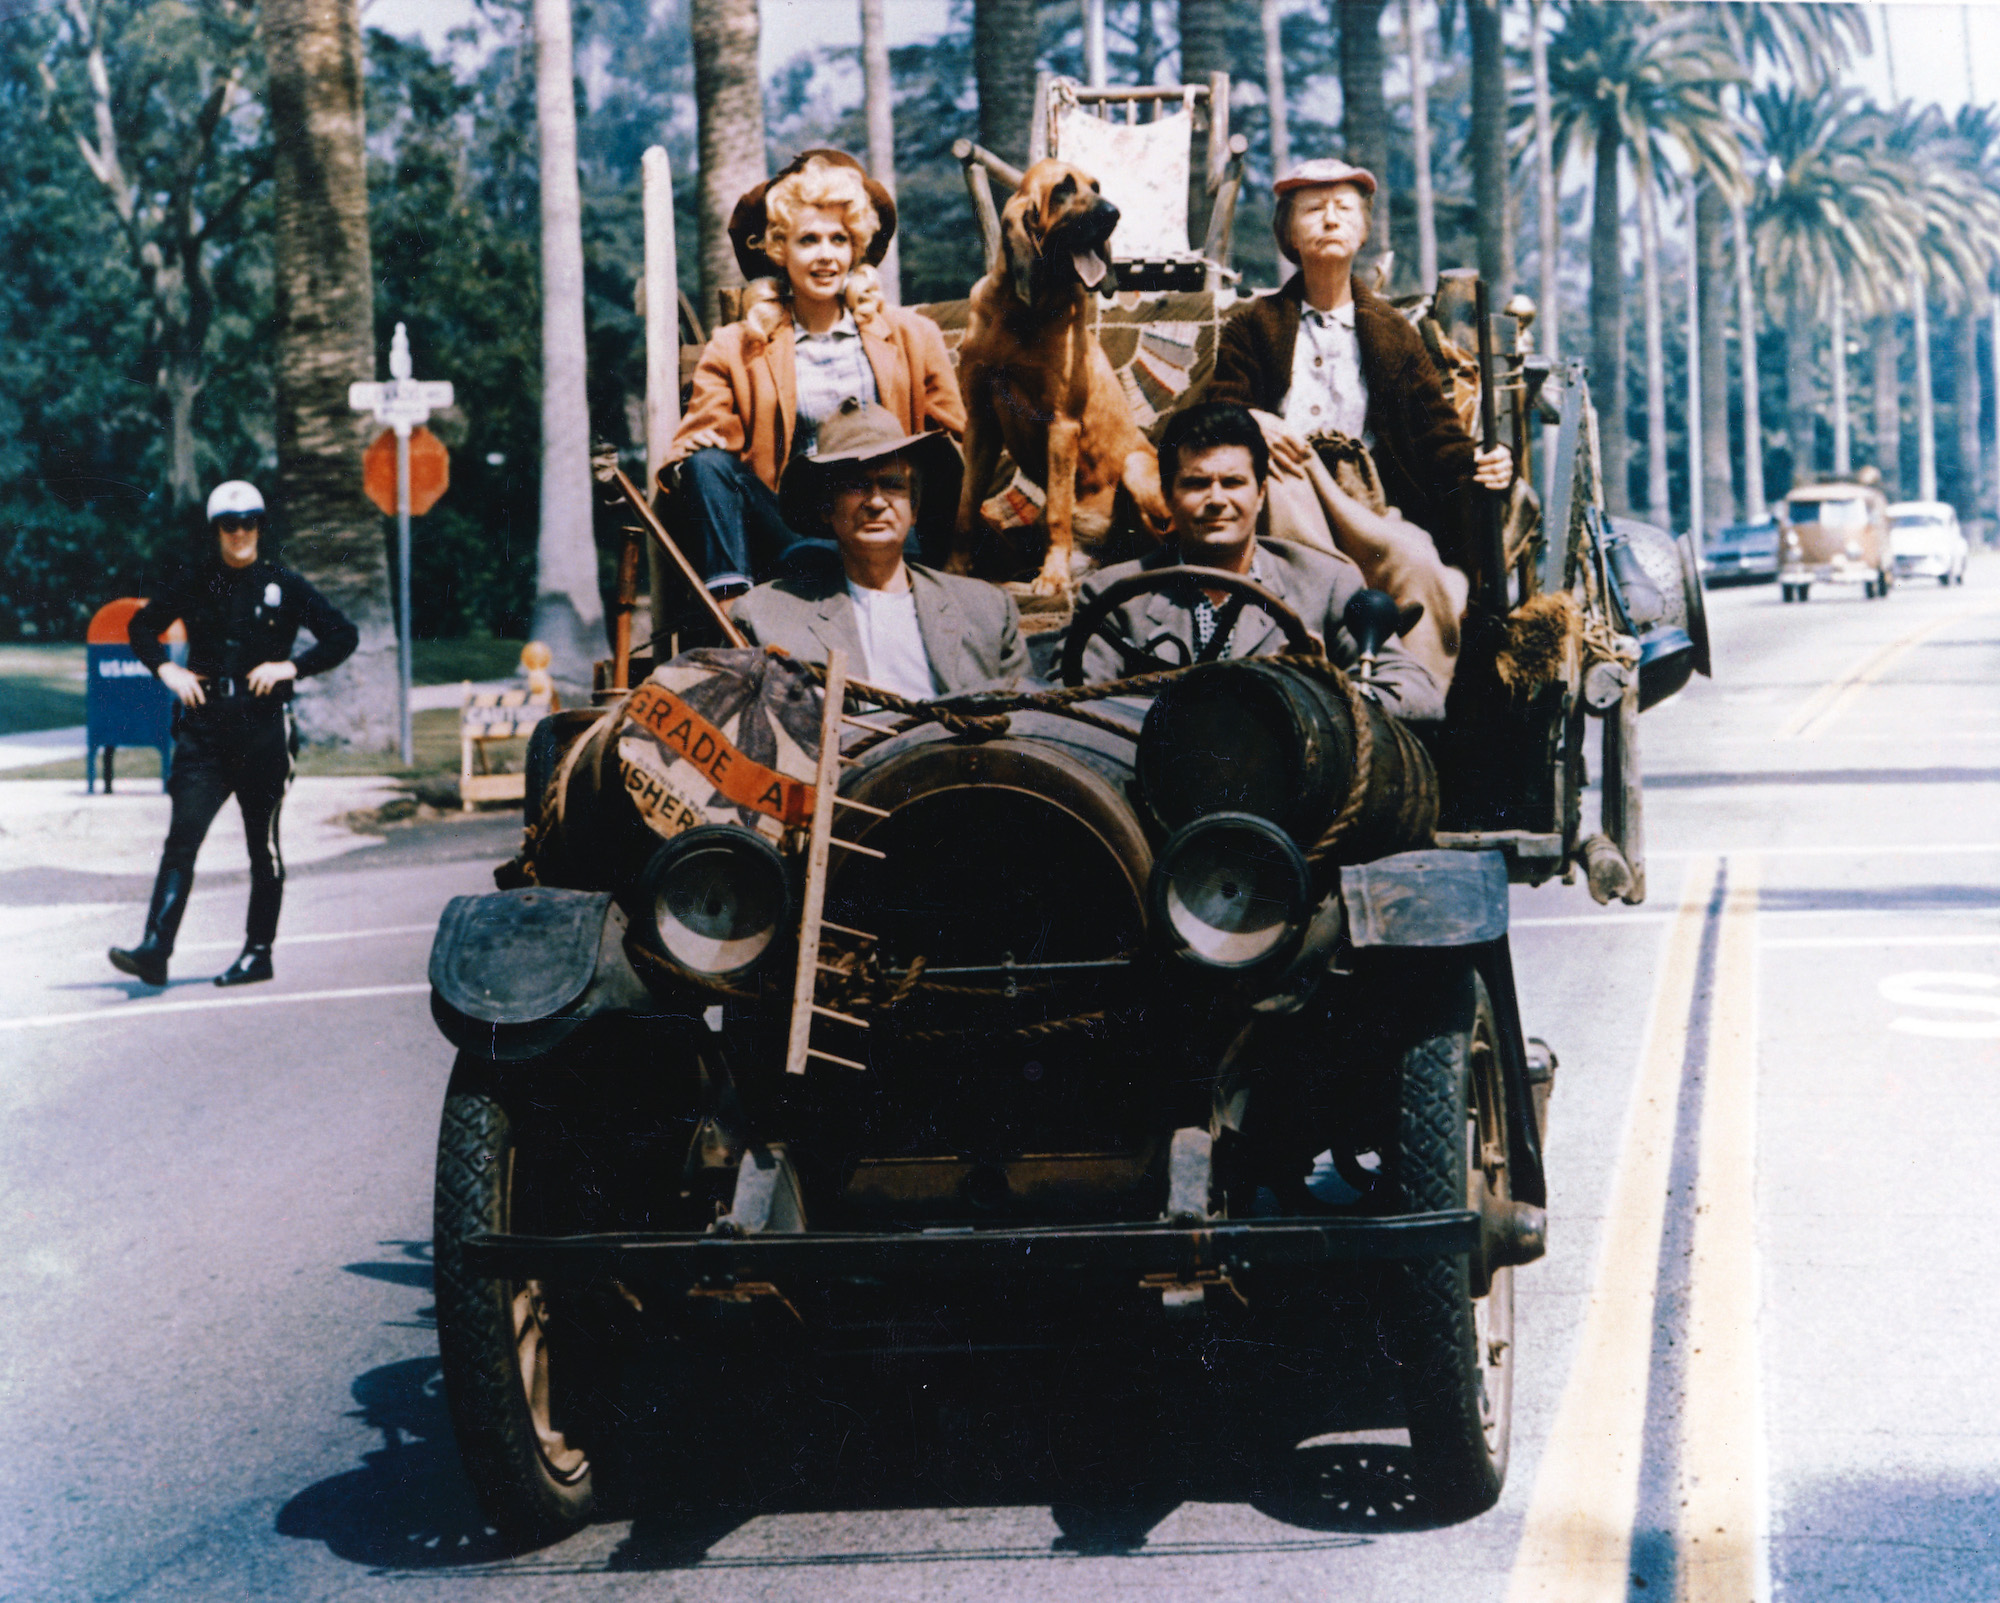 (L-R) Donna Douglas, Irene Ryan, Max Baer Jr, and Buddy Ebsen driving in an old car with no roof